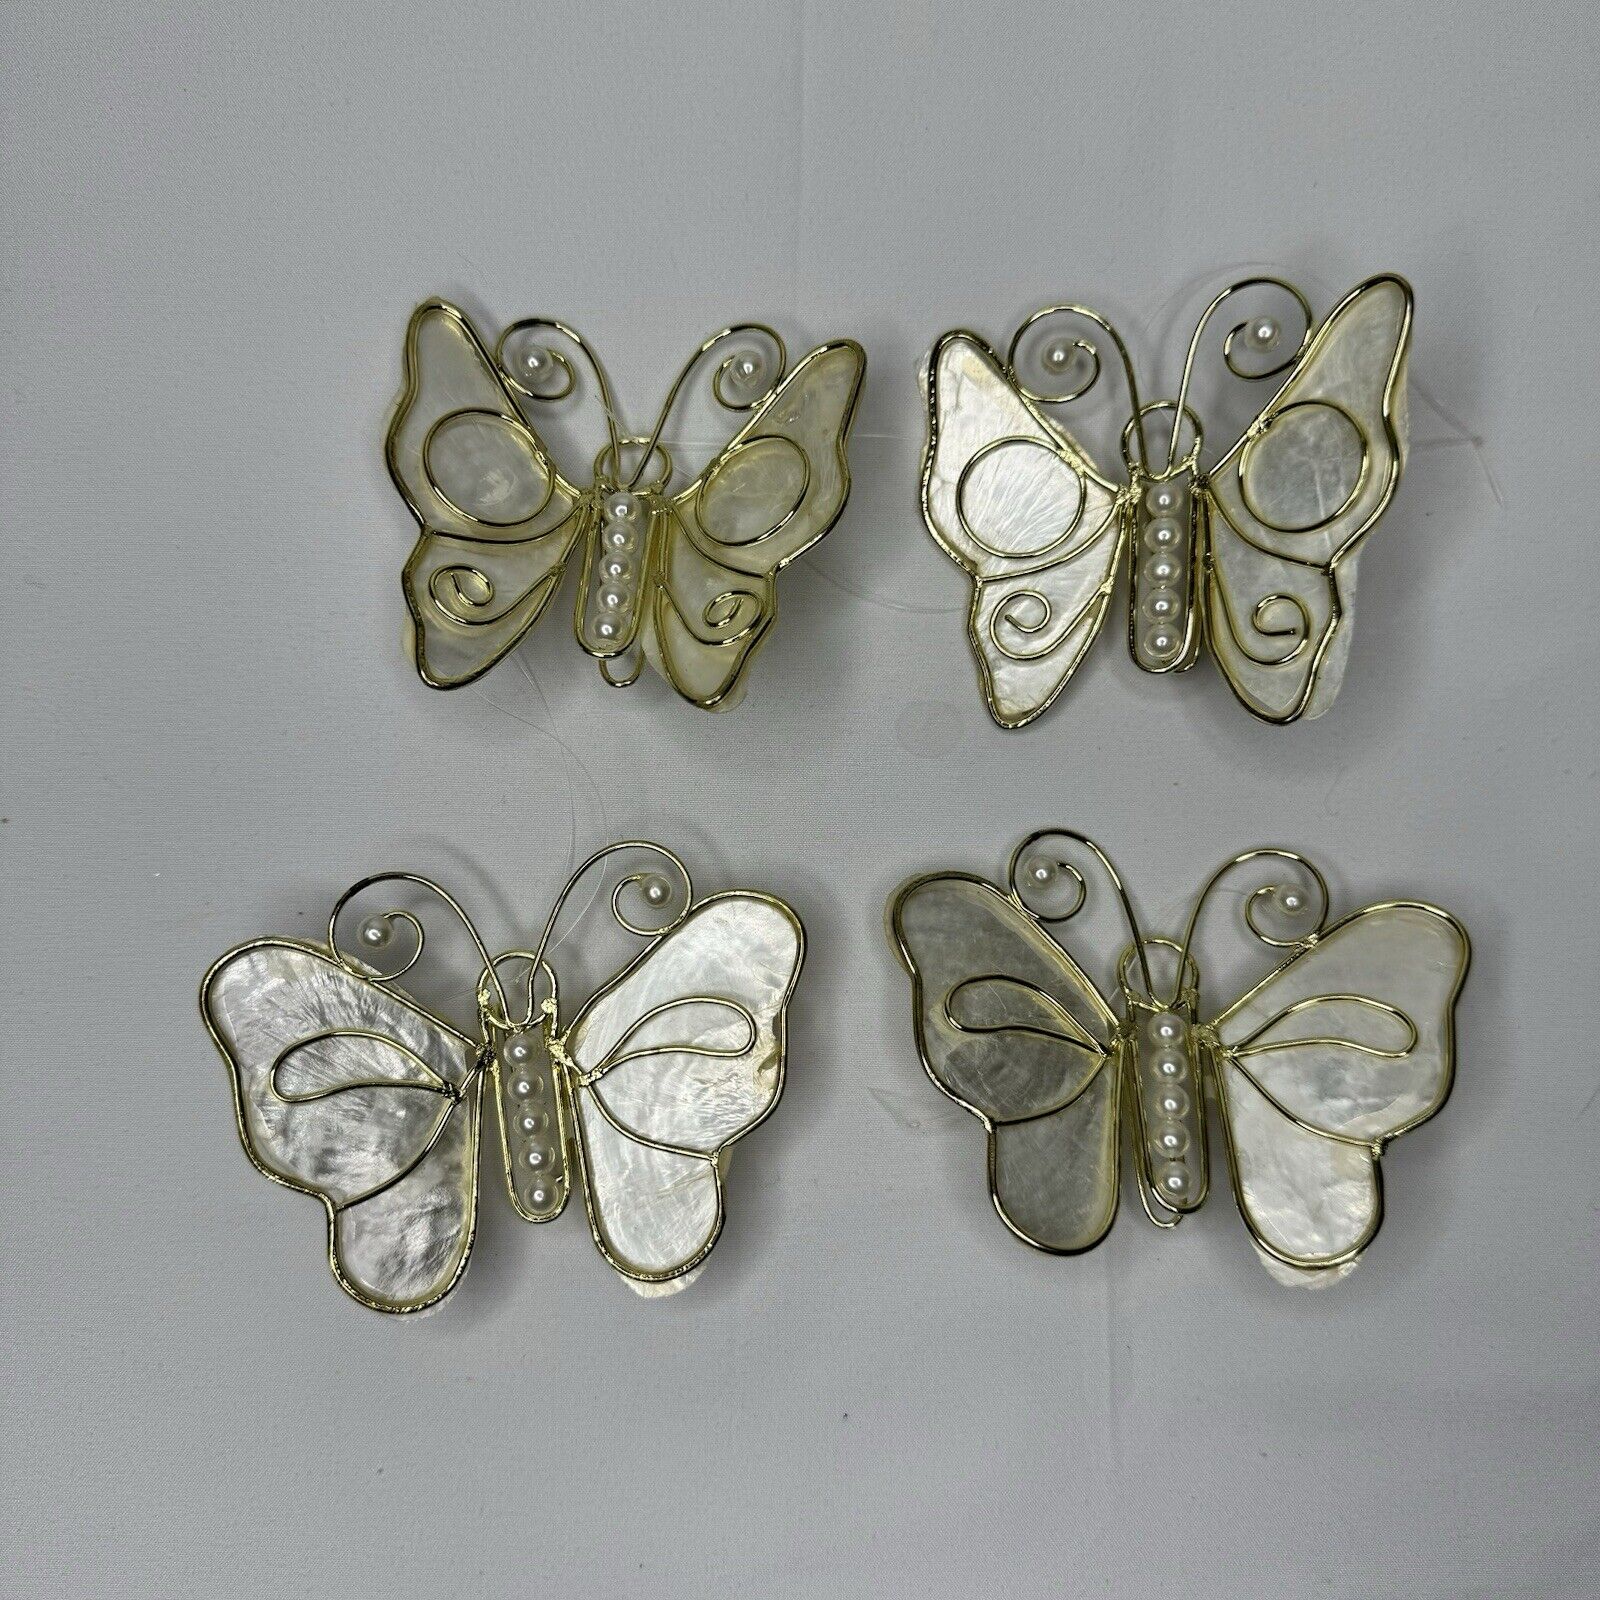 Vintage Capiz Shell Butterfly Ornaments Lot Of 4 Hooks Gold Tone Trim Faux Pearl